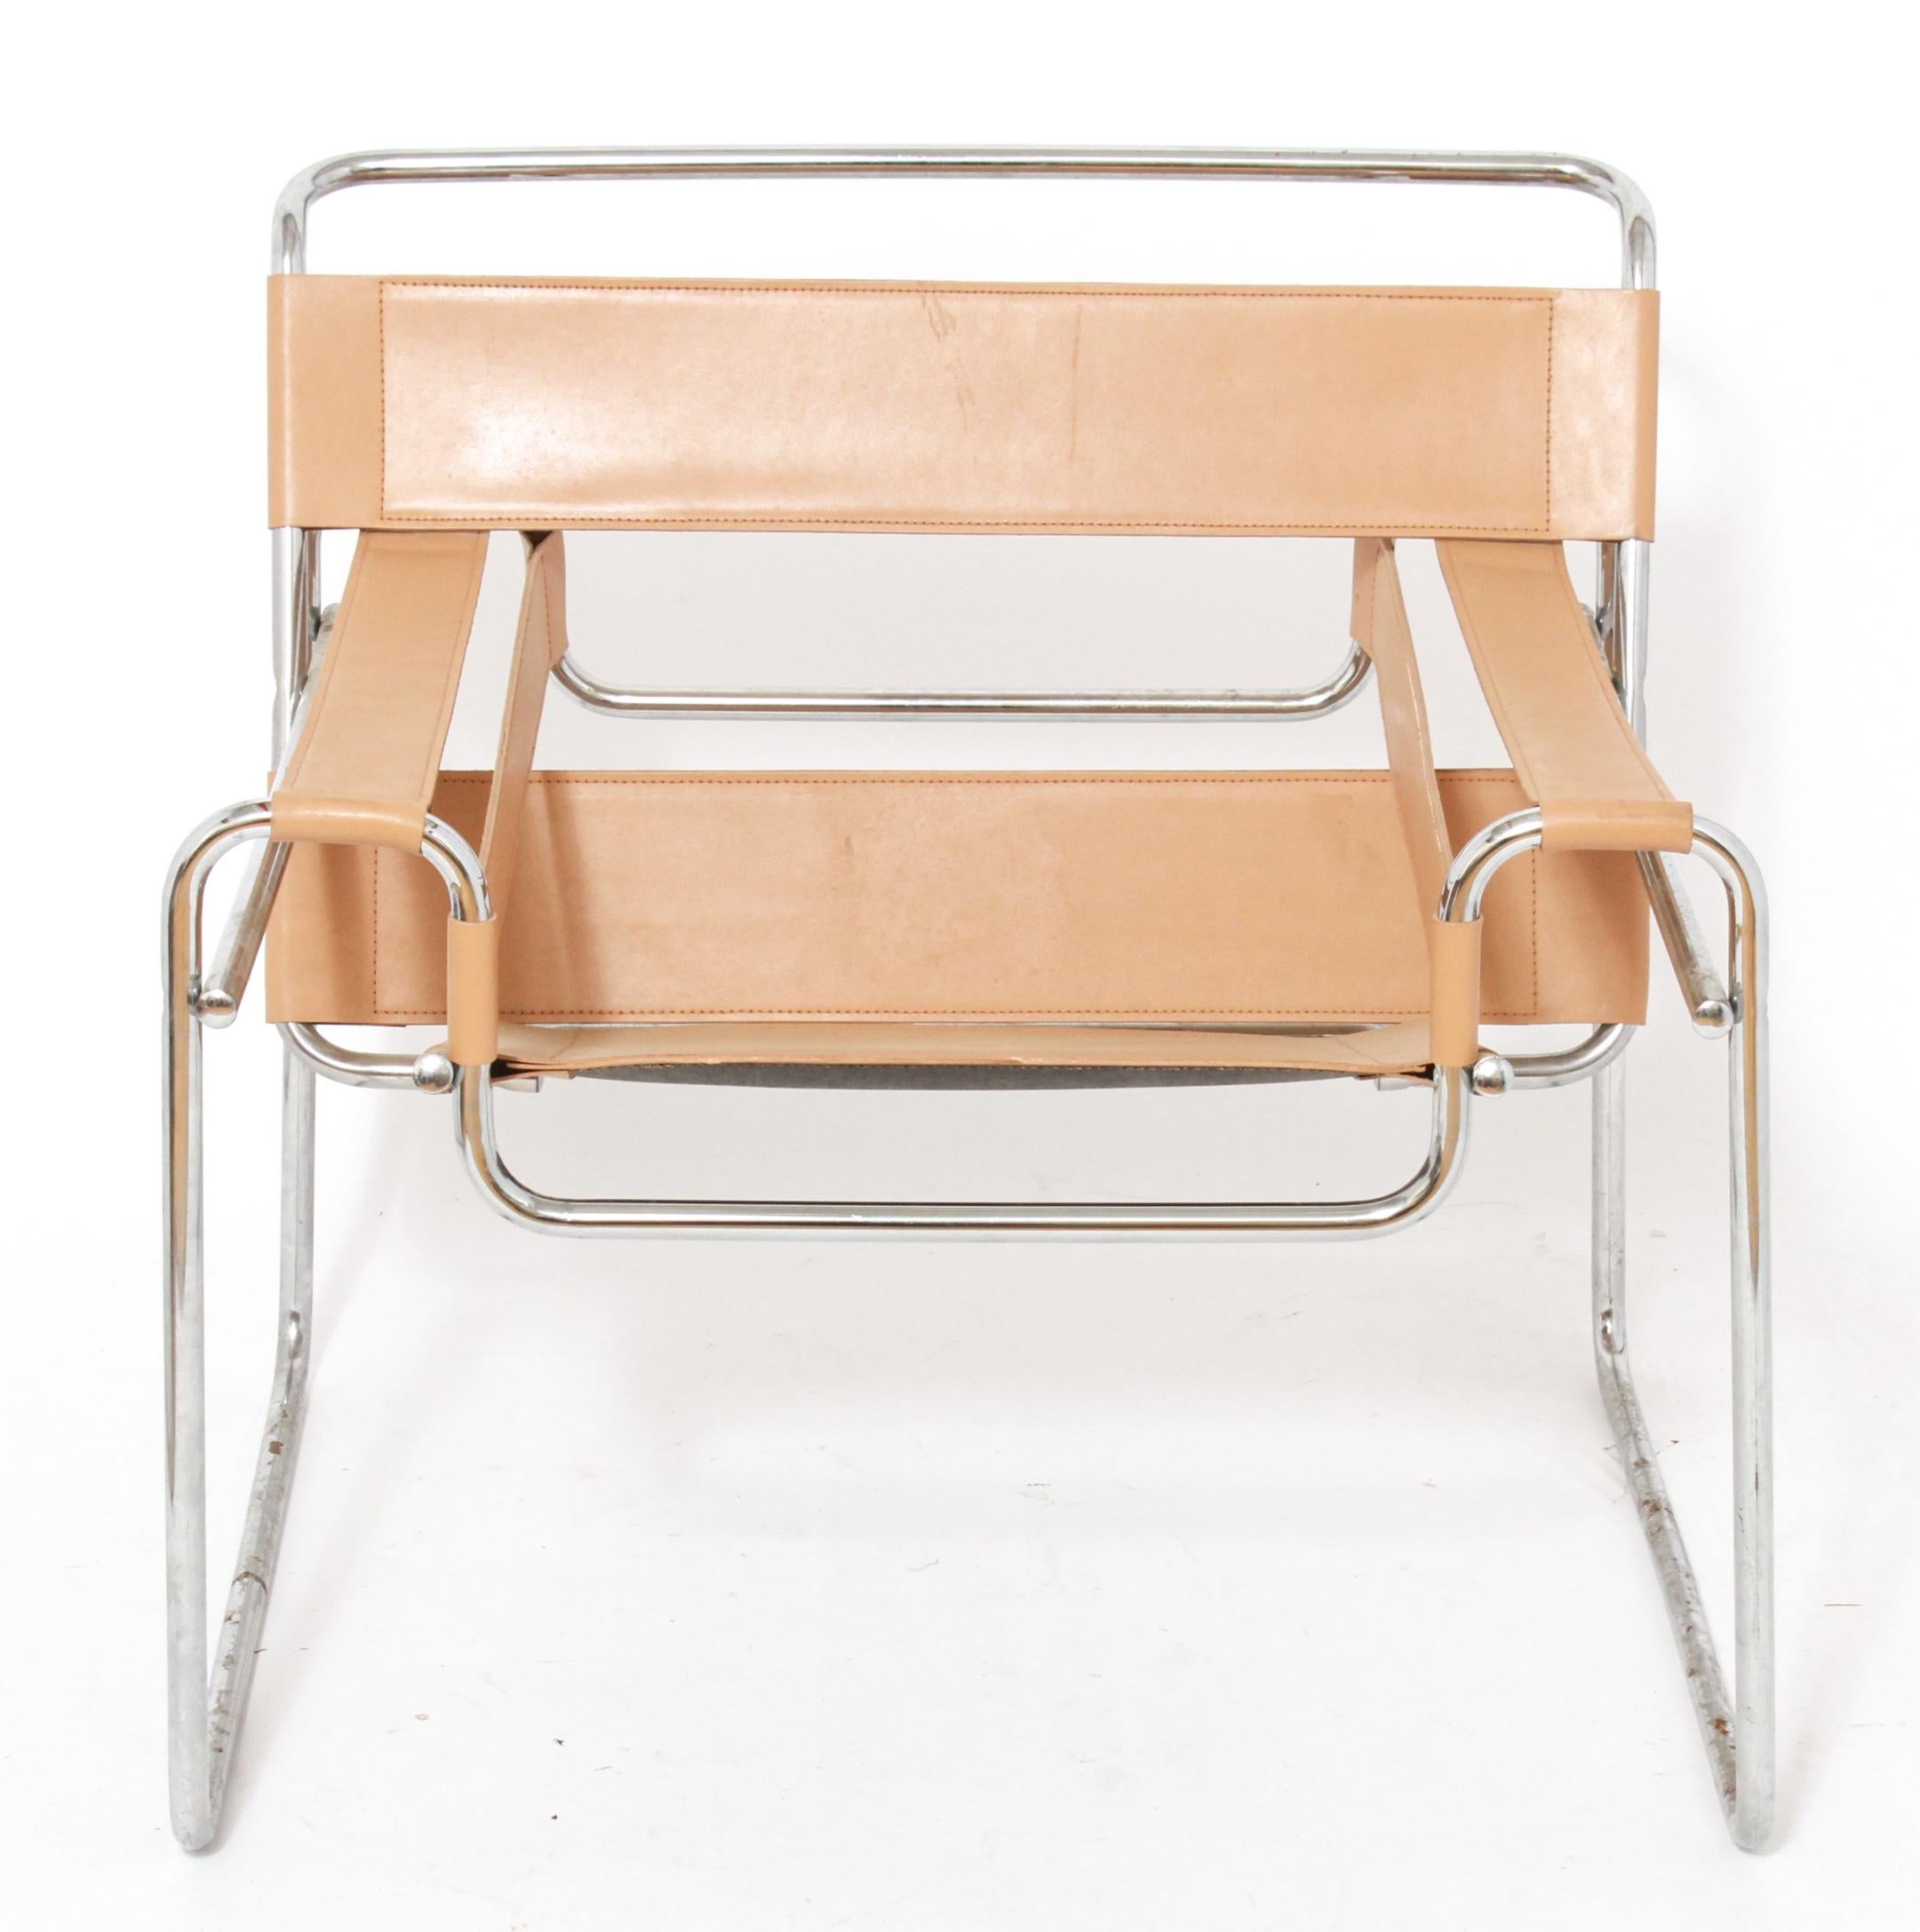 Pair of Marcel Breuer Wassily Model #B3 Mid-Century Modern lounge arm chairs, tan leather strap seat and back, with tubular chrome frame. Measures: 29